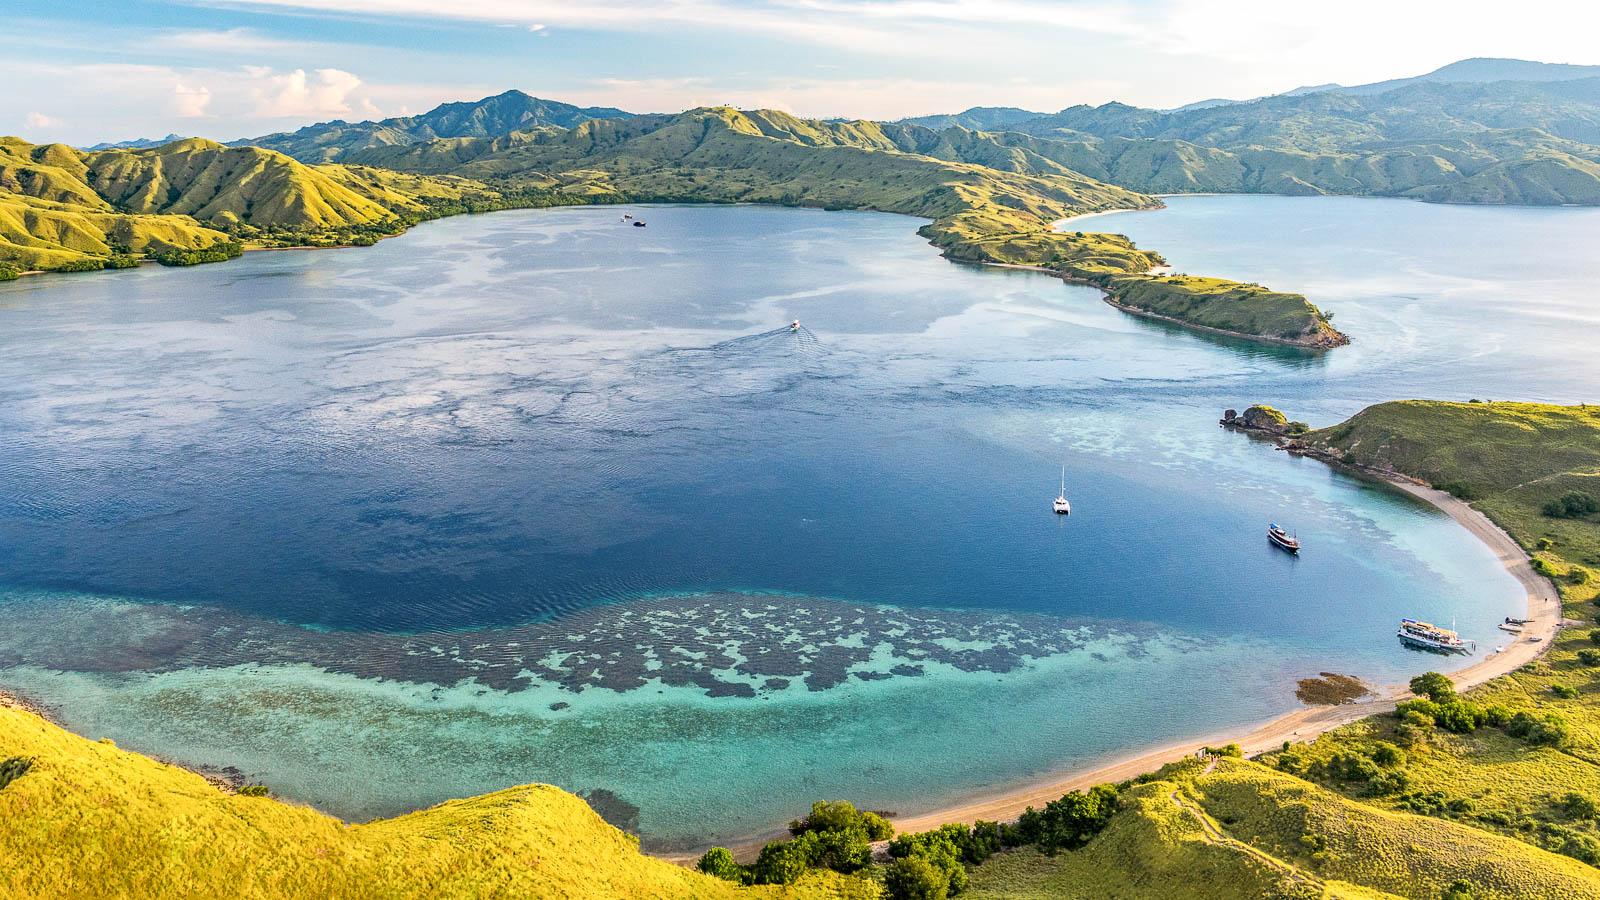 Top rated liveaboards in the Komodo National Park | ZuBlu